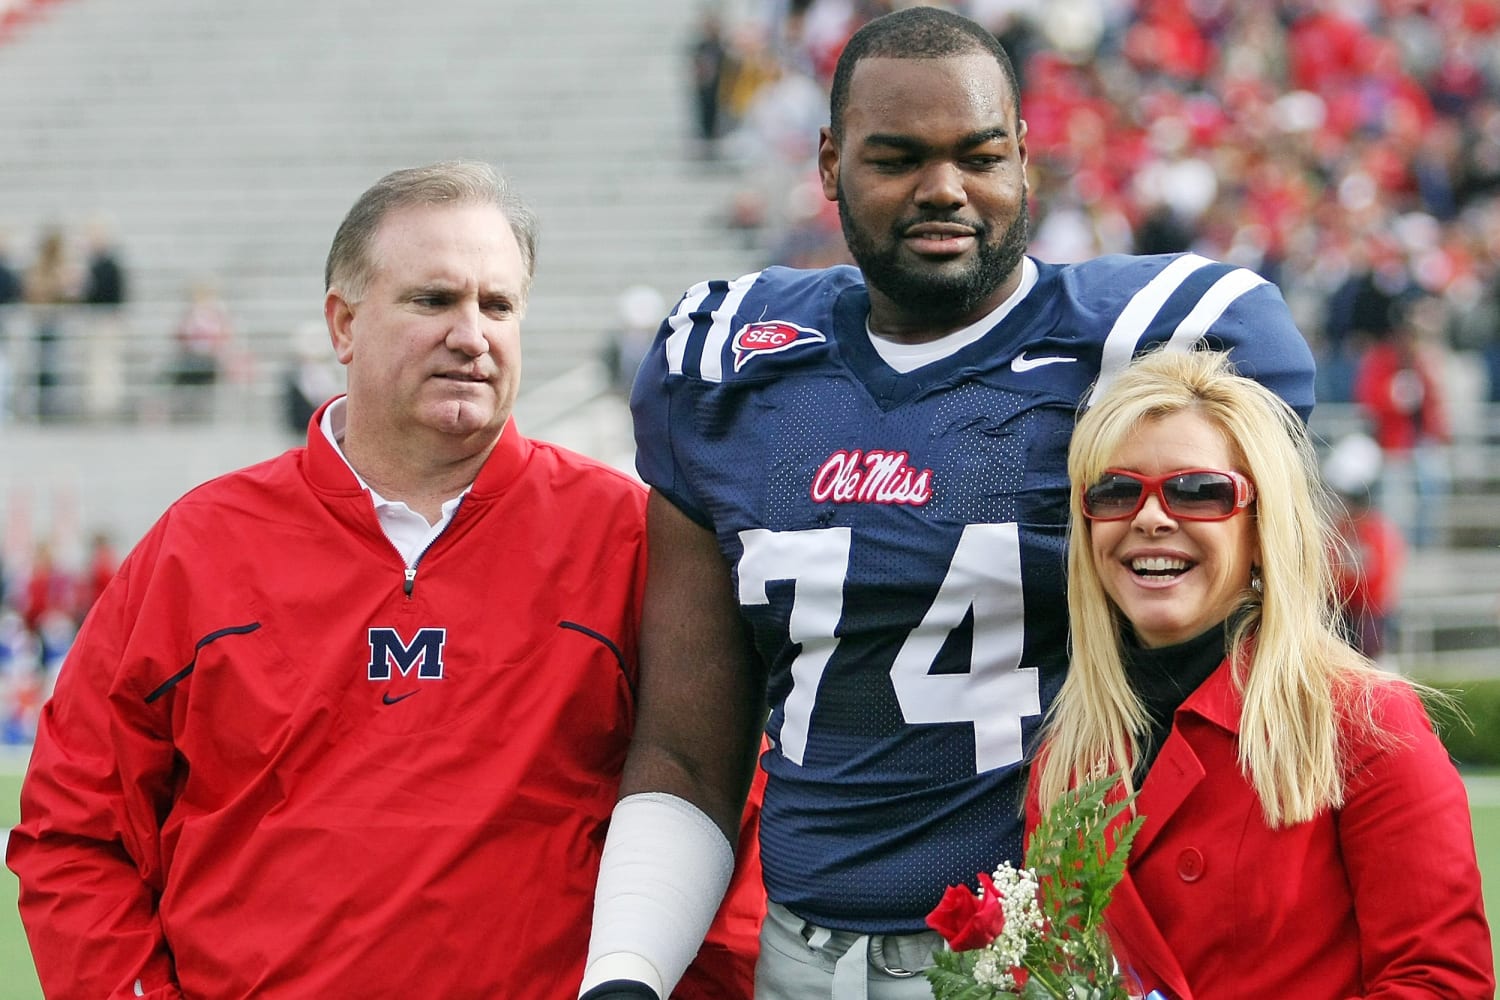 'Blind Side' Tuohy family say there was no 'intent to adopt' Michael Oher, deny profiting off his name